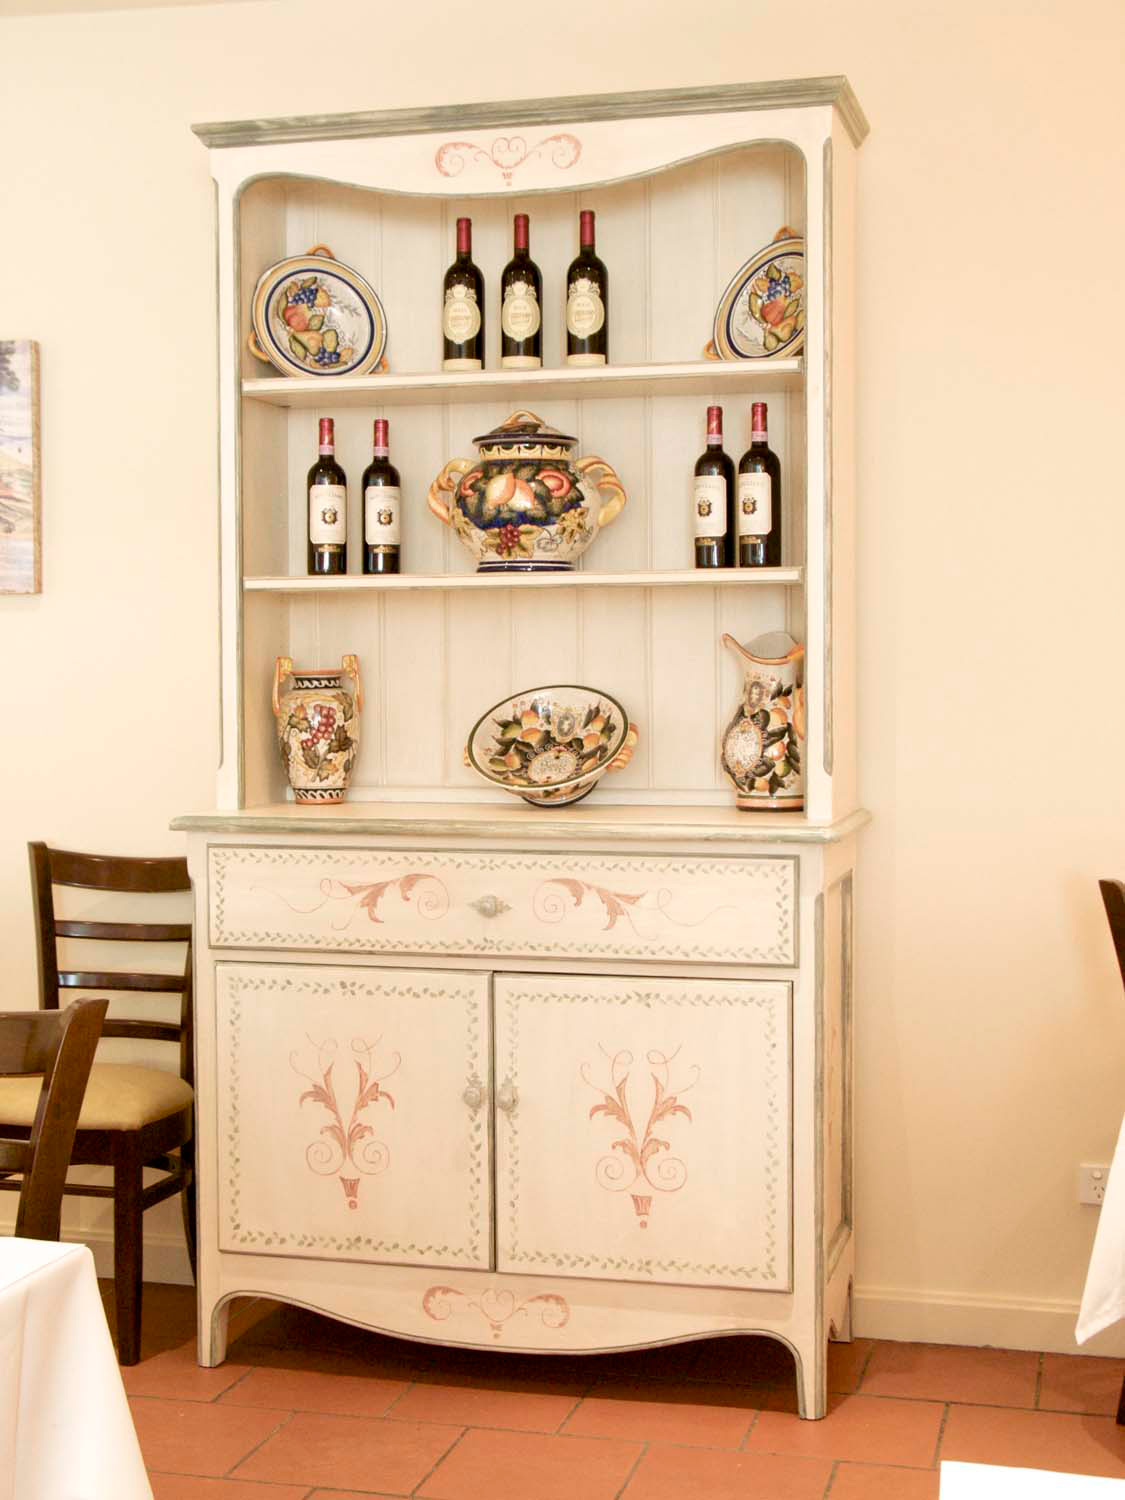 3 French buffet sideboard with painted motifs in dining room with dining chair